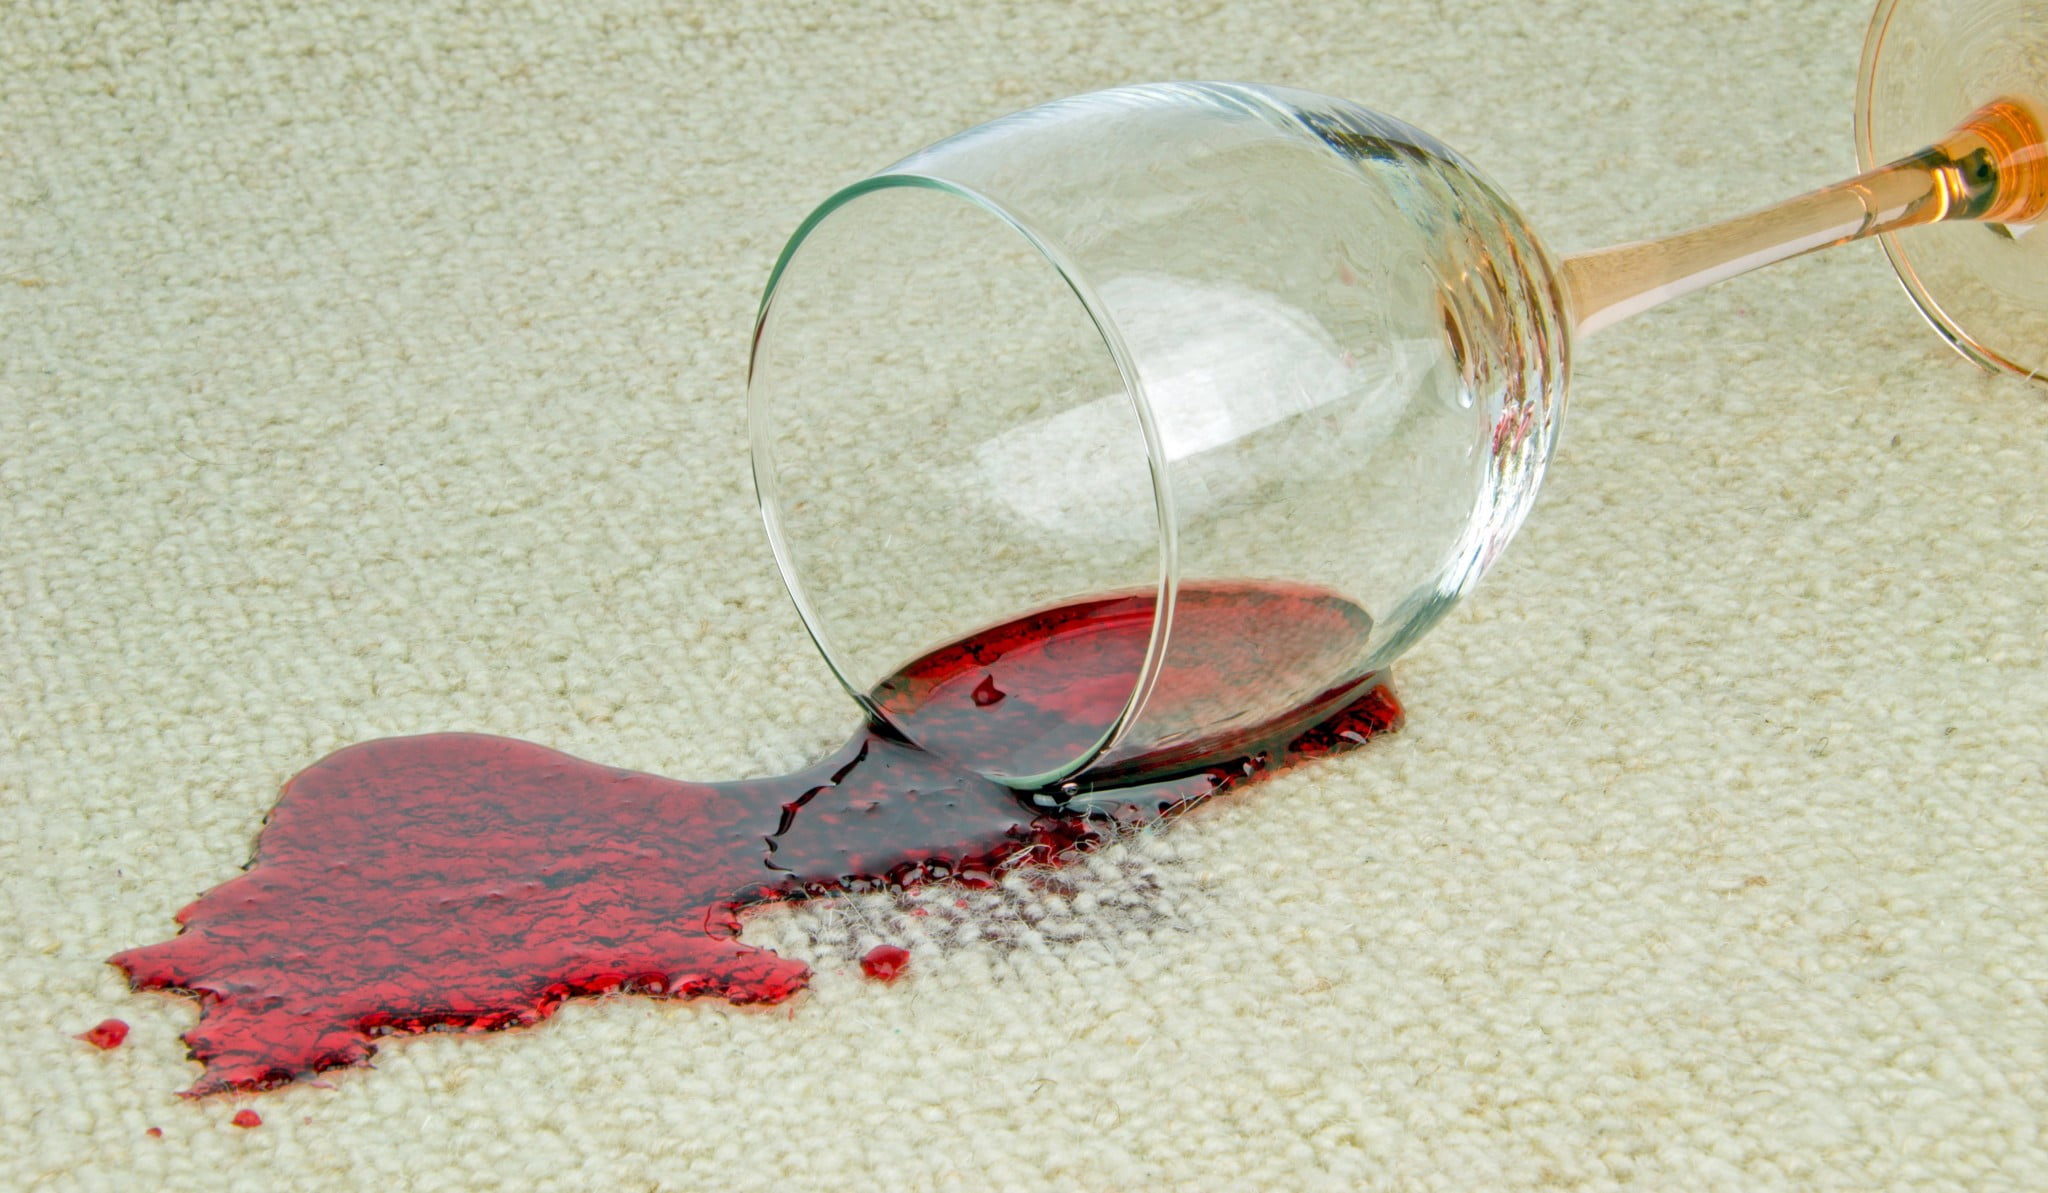 drug treatments: red wine spills from glass onto beige carpet